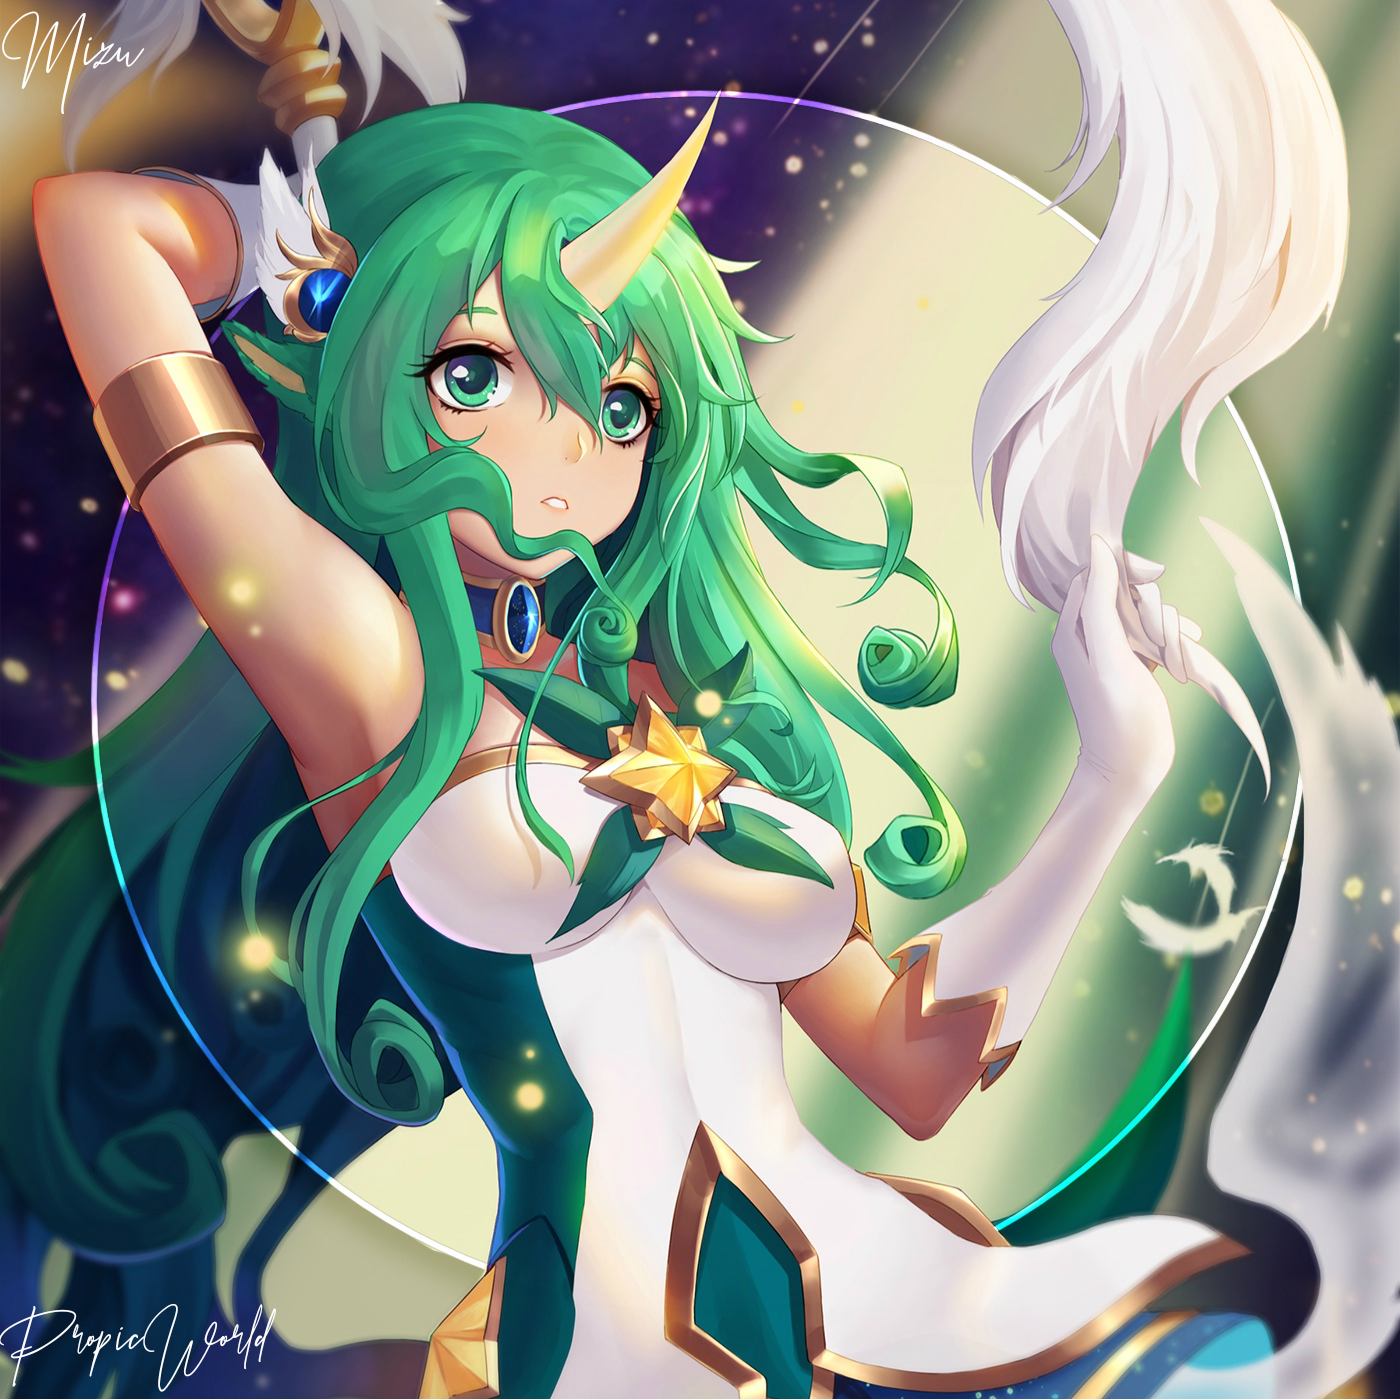 This visual is about propic soraka starguardian leagueoflegends #propic #so...